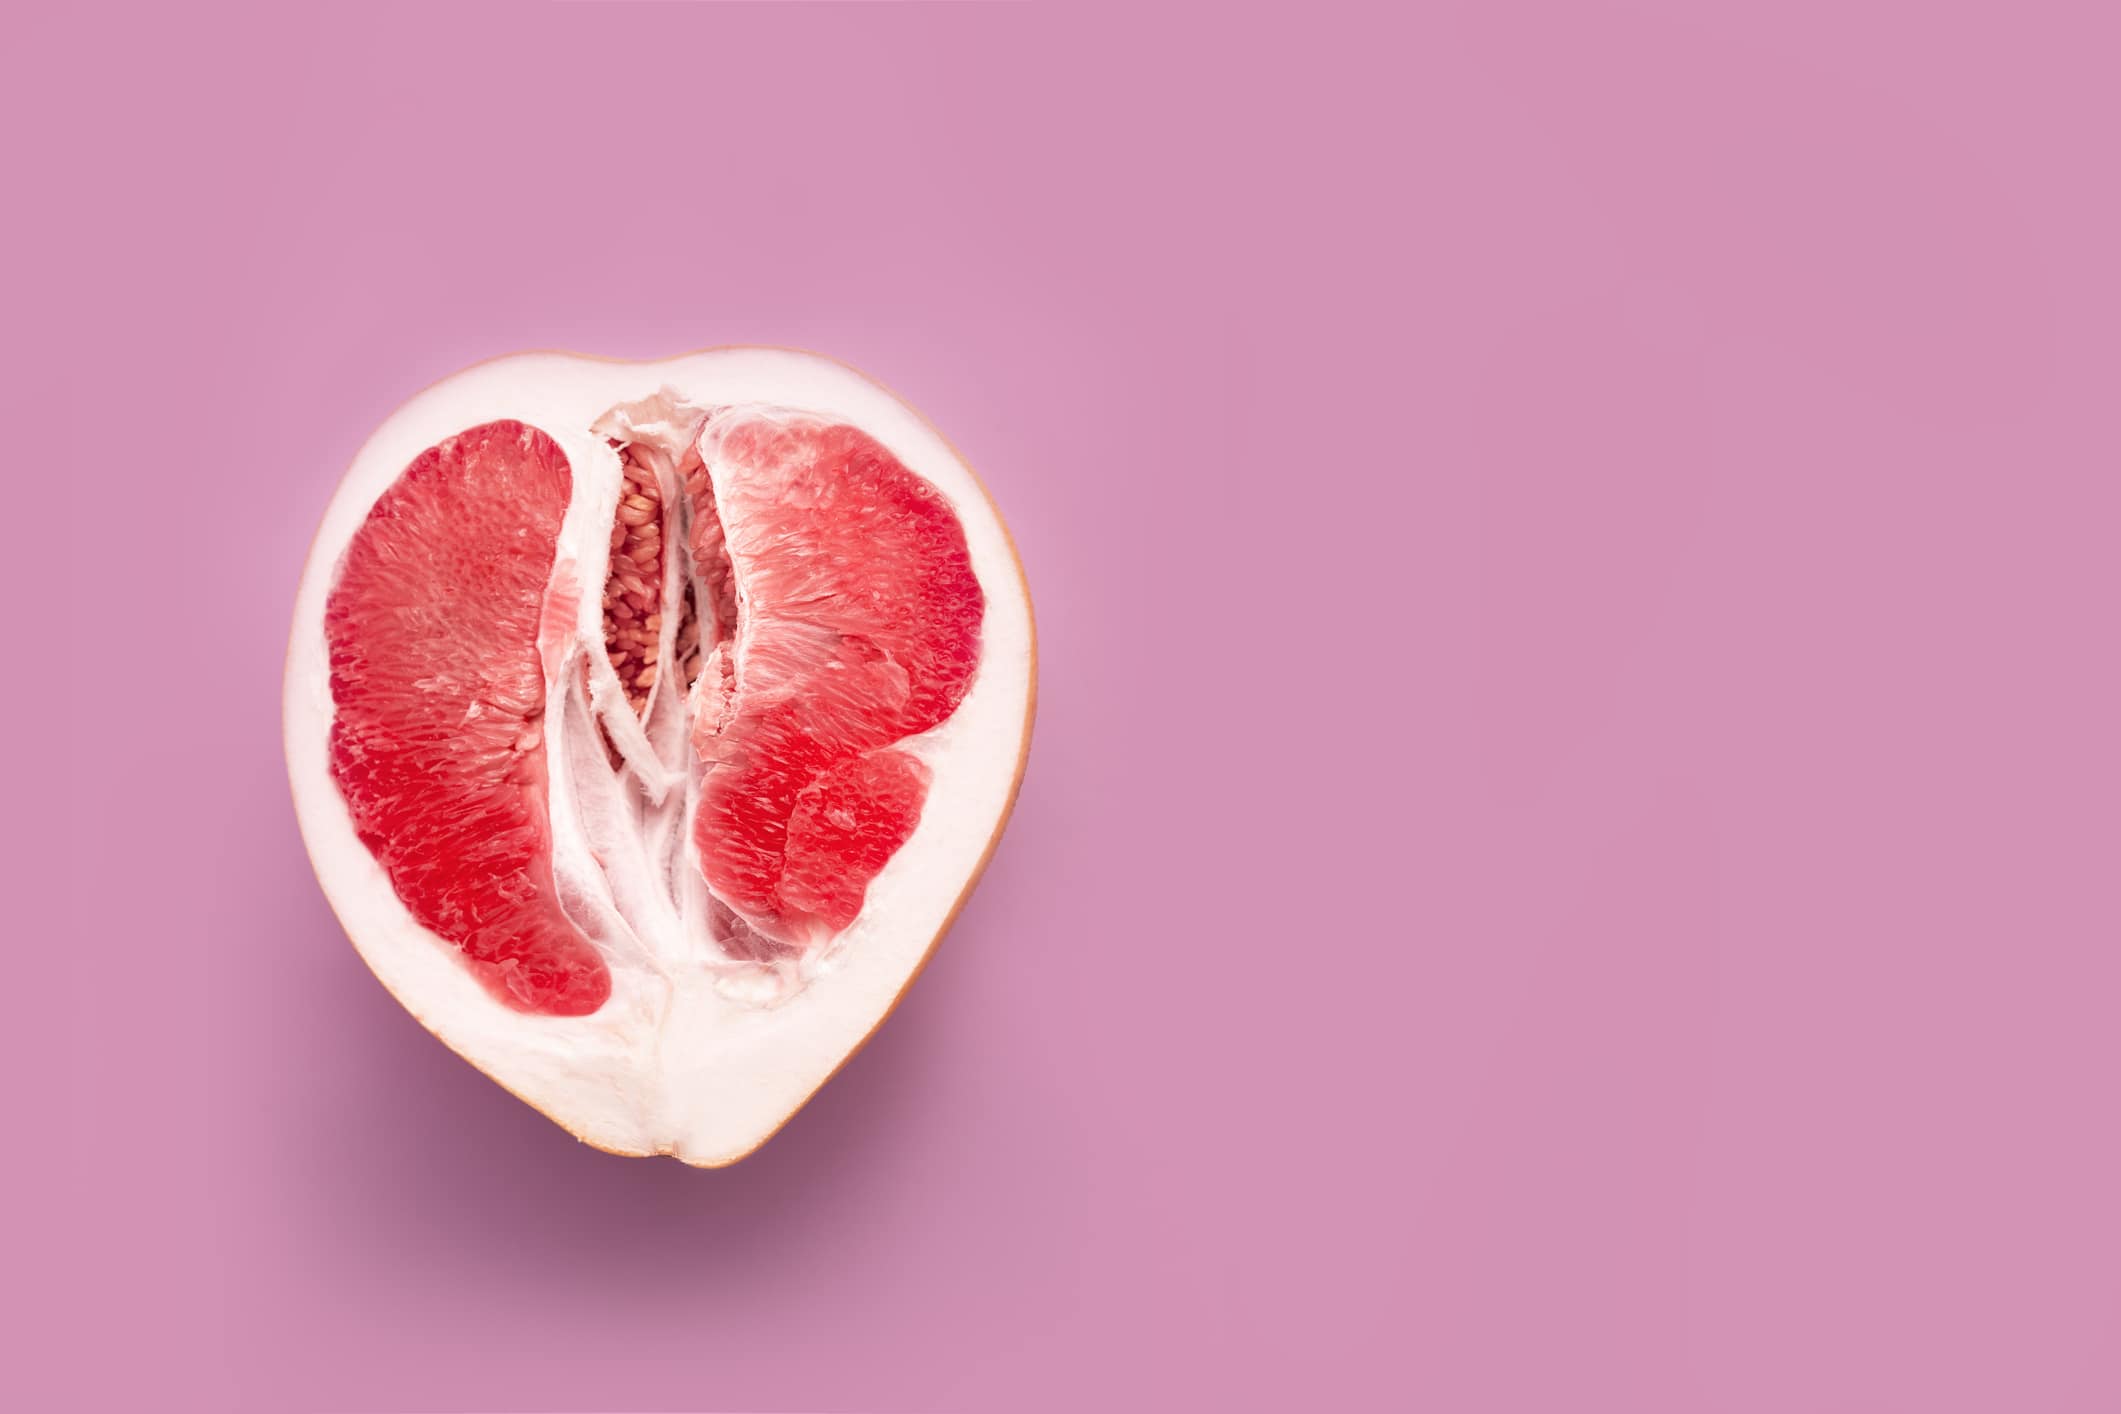 A halved grapefruit representing the female reproductive system on a pink background.